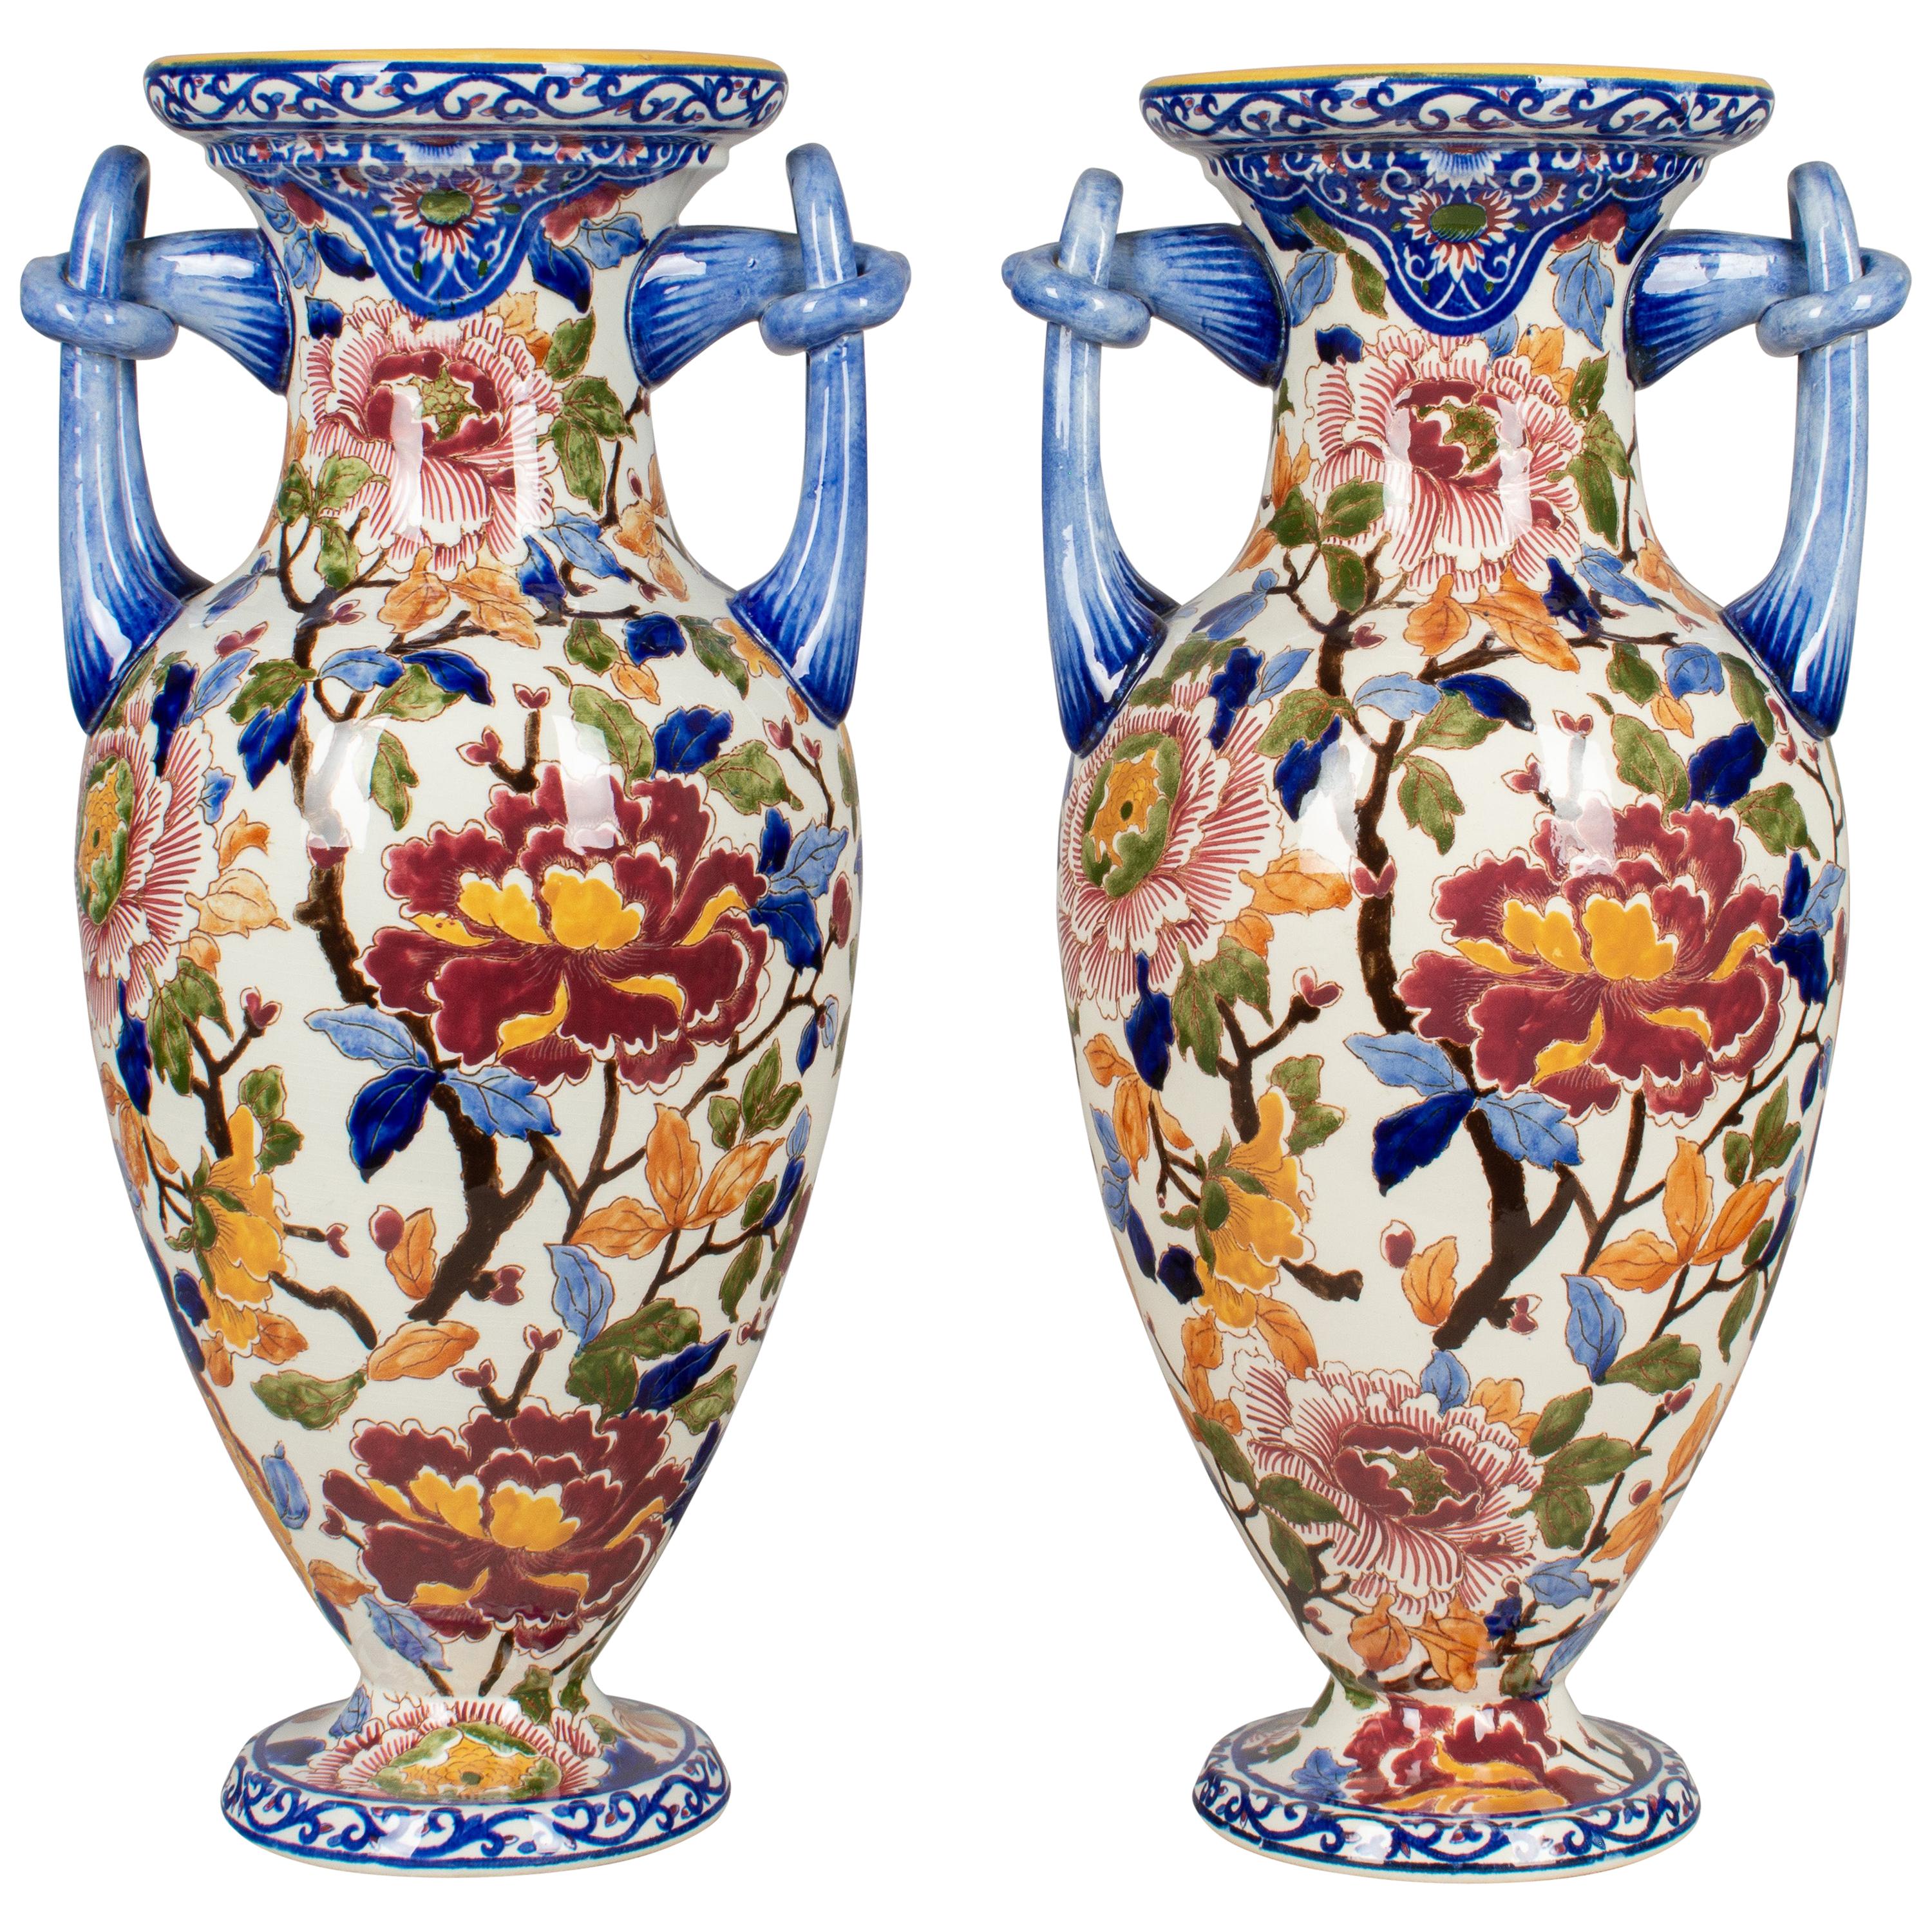 Pair of French Faience Gien Vases